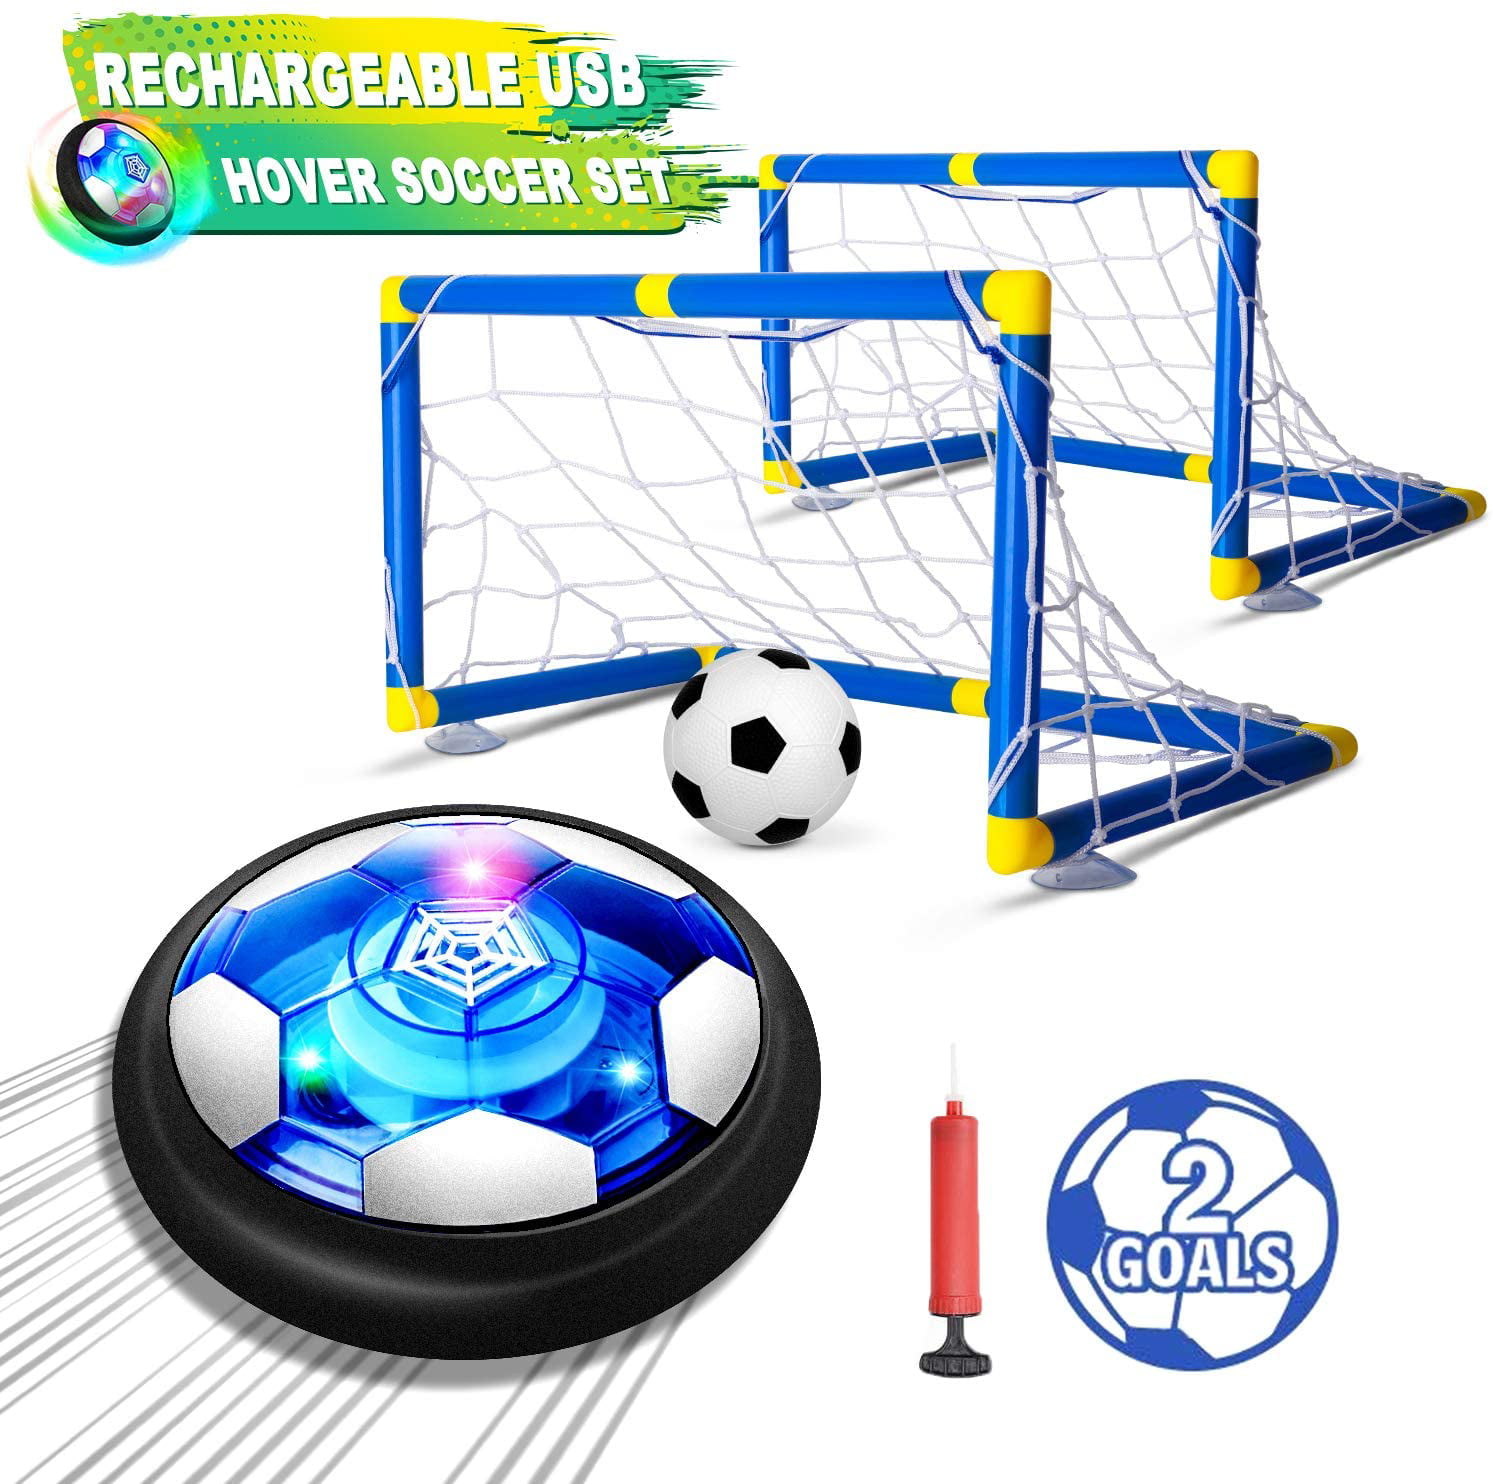 Kids Hover Soccer Ball Toys Rechargeable,Air Power Soccer Toy with 2 Goals Led Foam Bumper Indoor Outdoor Games Sports Soccer Ball Holiday Easter Birthday Gifts Boys Girls Toddlers Age 4 5 6 7 8 9